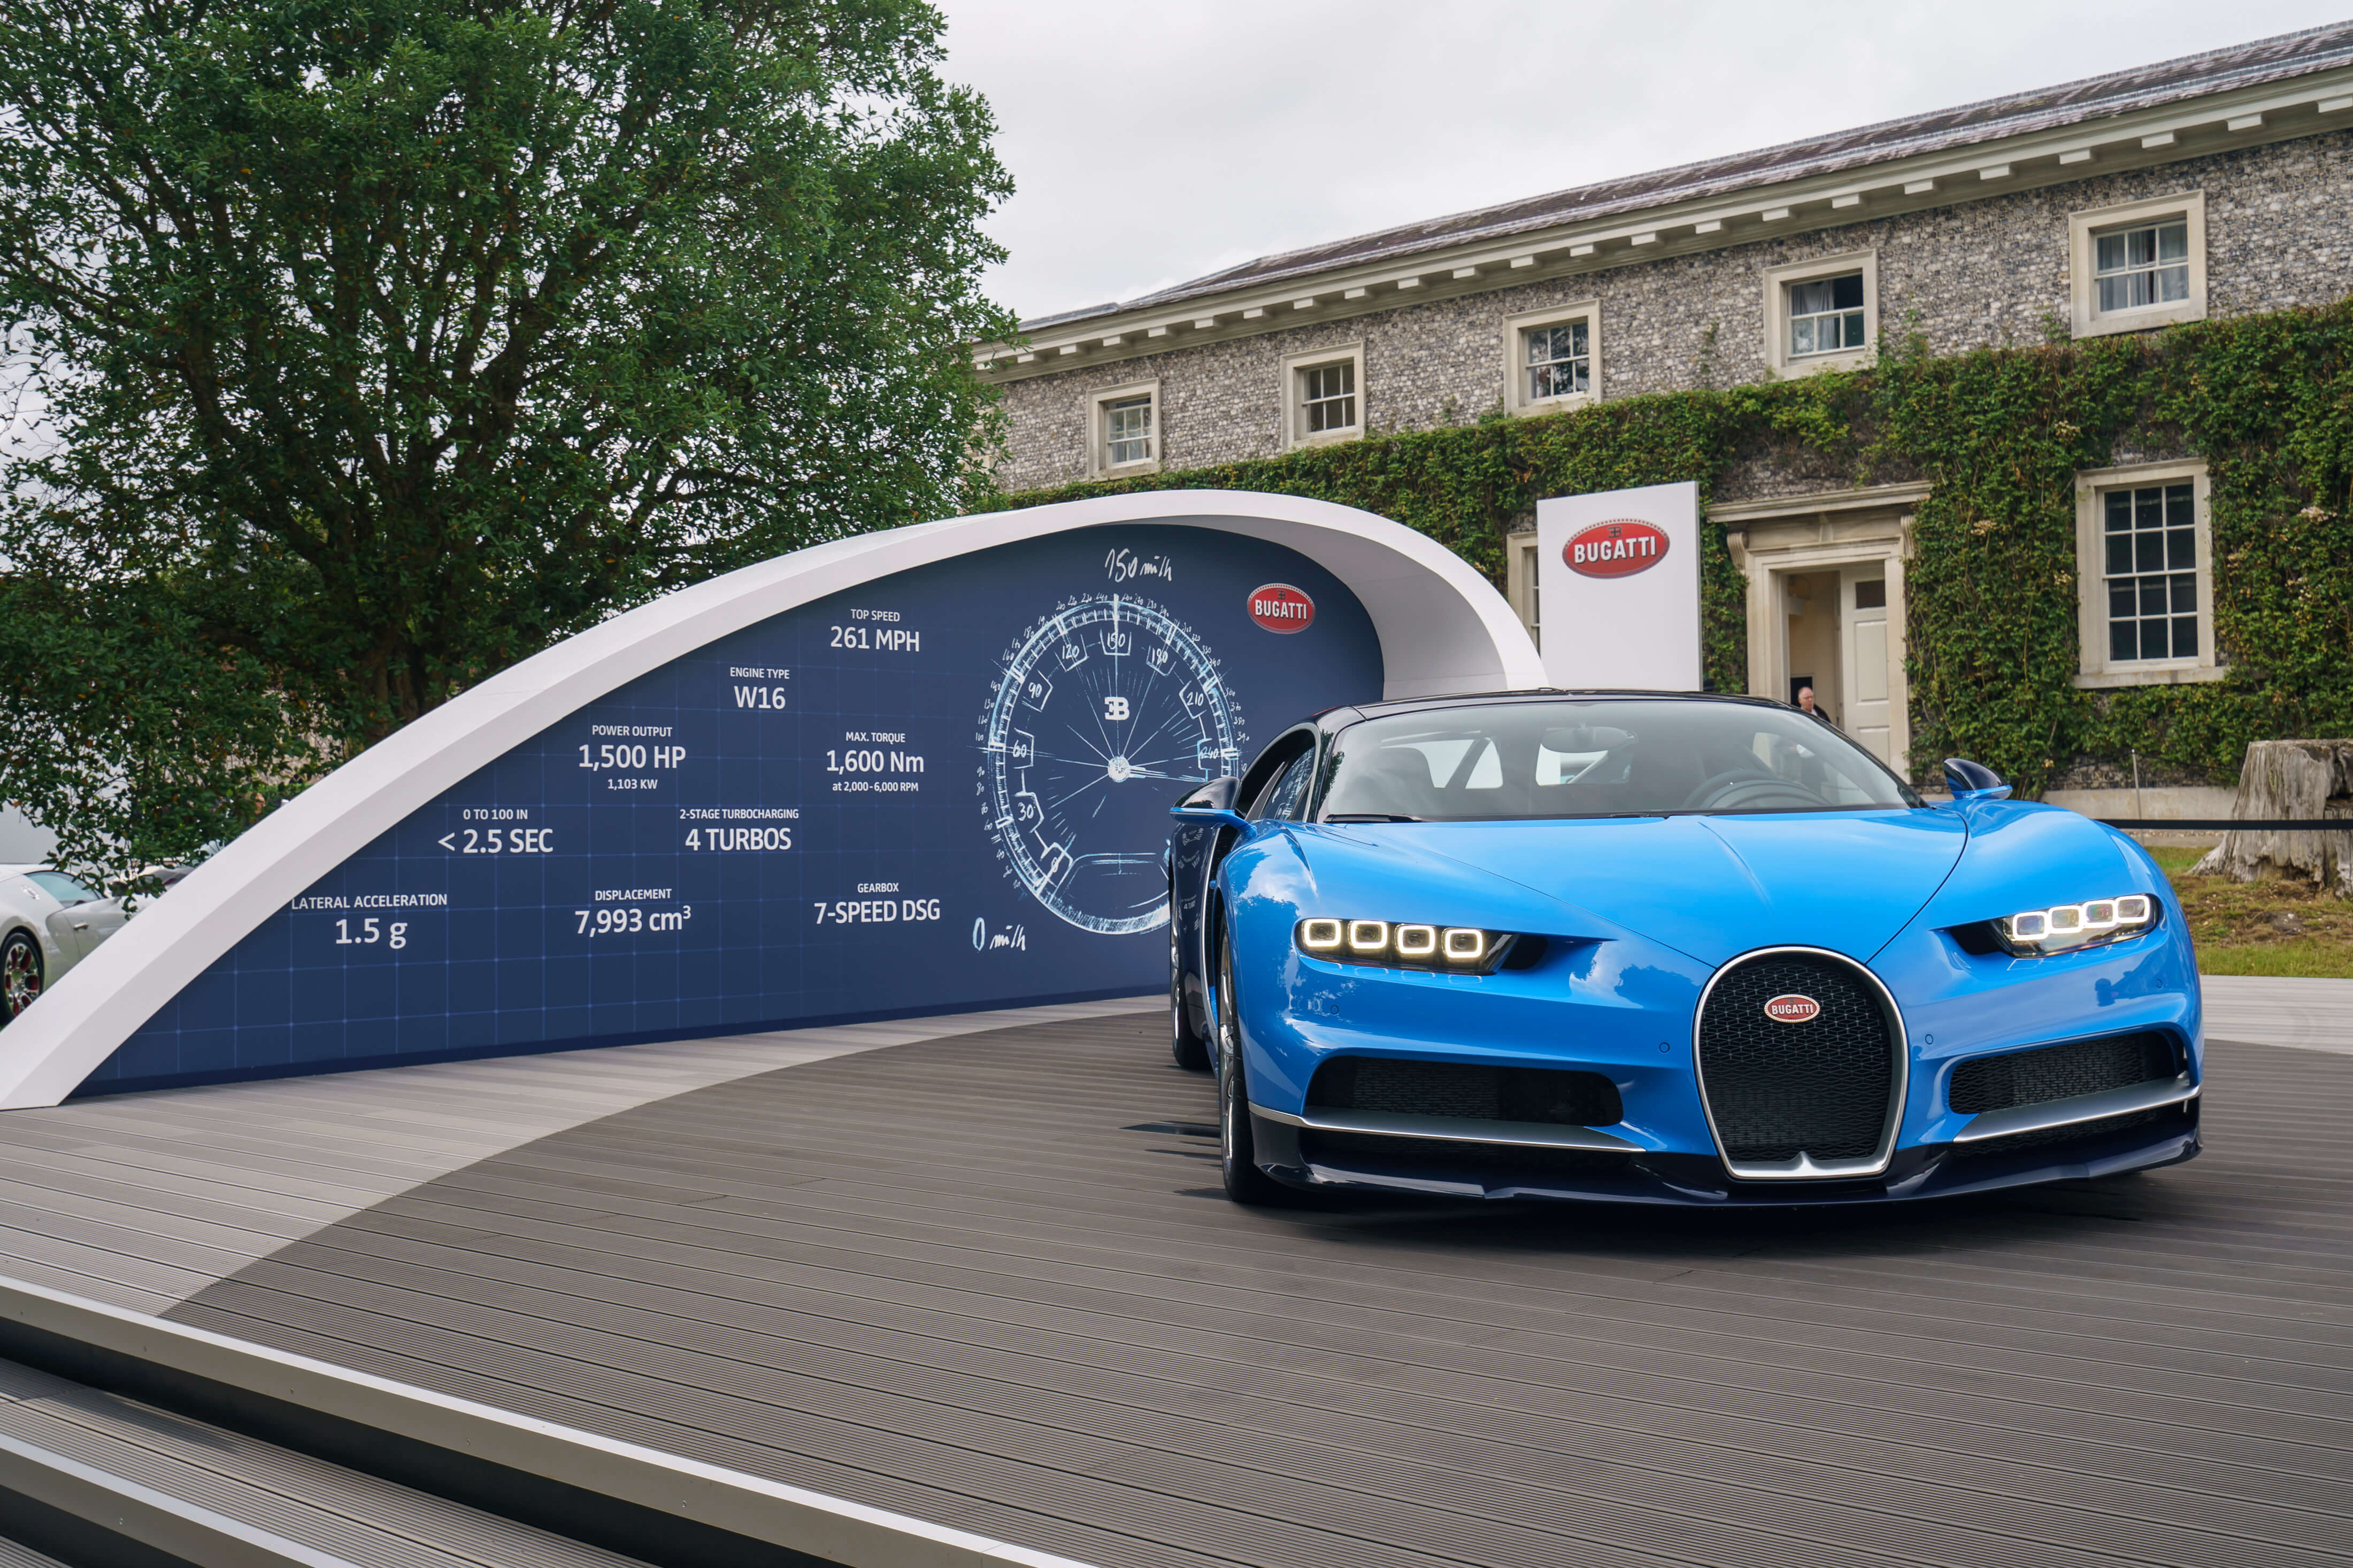 Bugatti makes an impressive appearance at the Goodwood Festival of Speed 2017